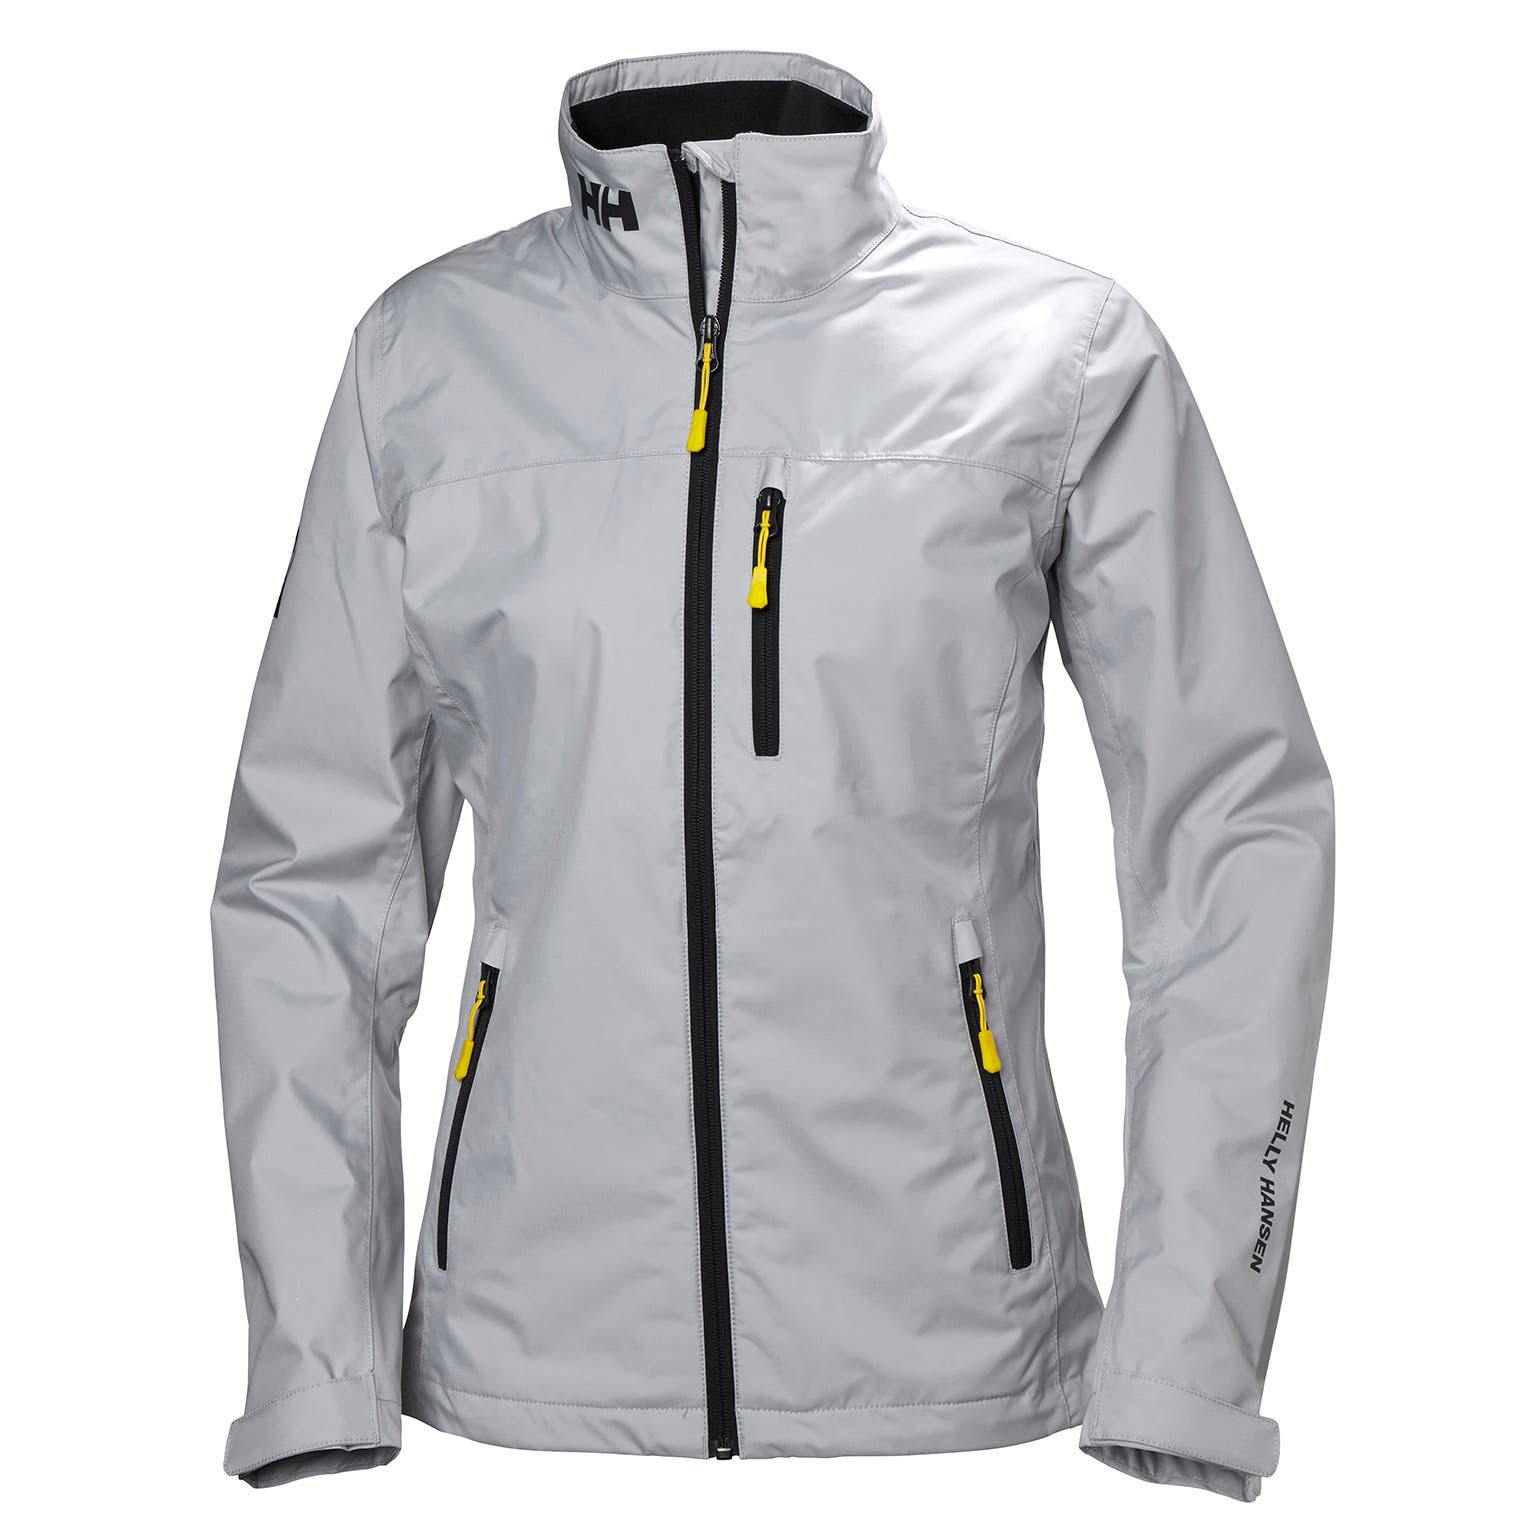 Helly Hansen Women's Crew Midlayer Jacket in Grey Fog from the front